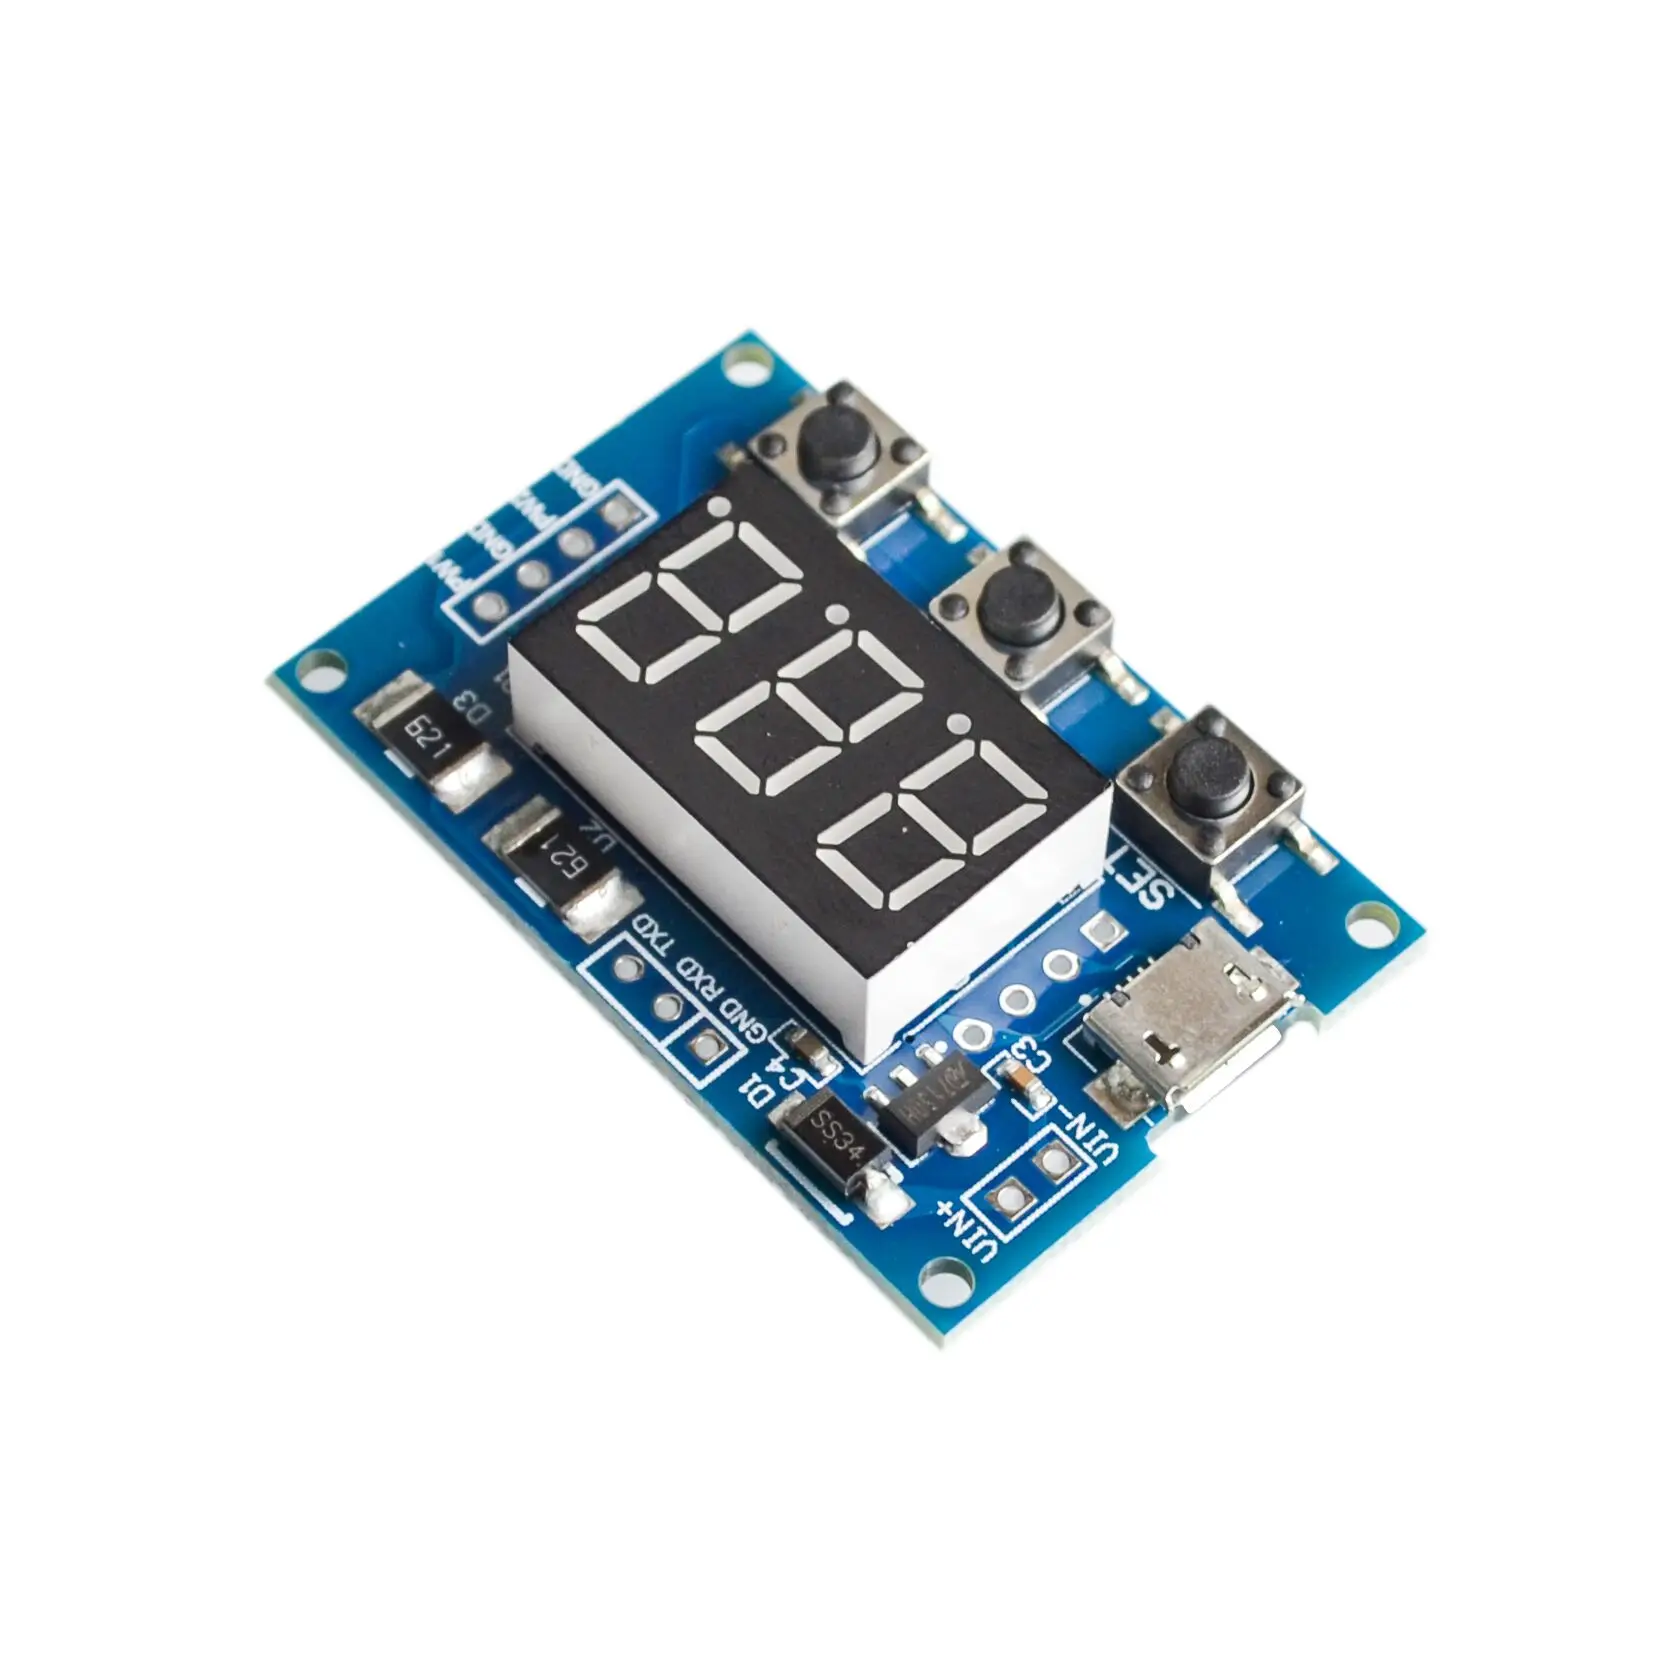 

DC 5-30V Micro USB 5V Power Independent PWM Generator 2 Channel Dual Way Digital LED Duty Cycle Pulse Frequency Board Module DIY